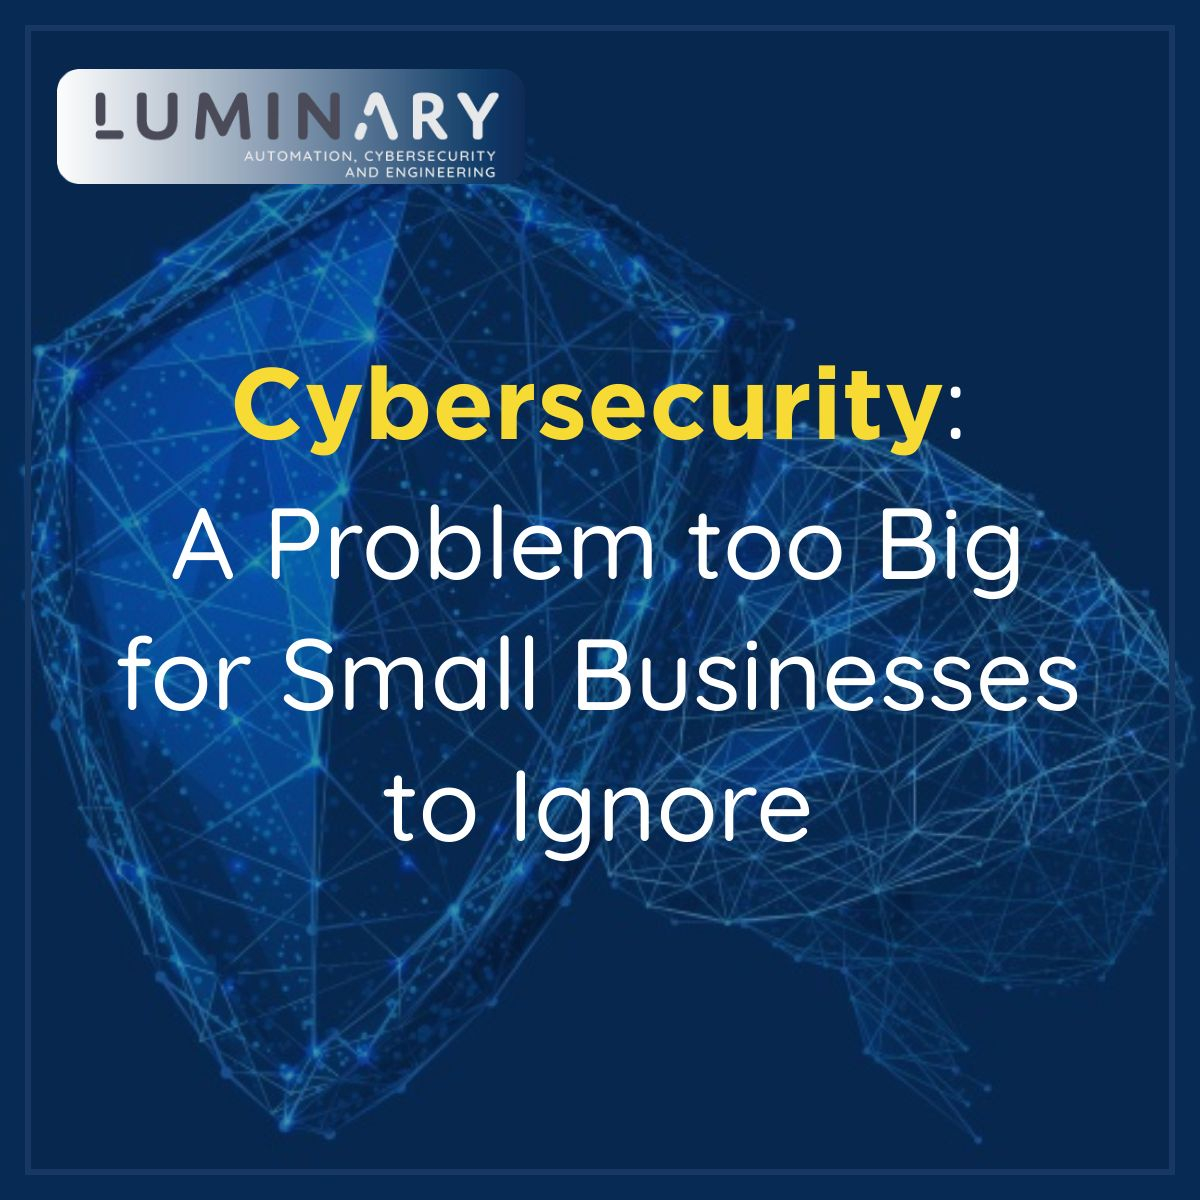 Cybersecurity: A Problem too Big for Small Businesses to Ignore